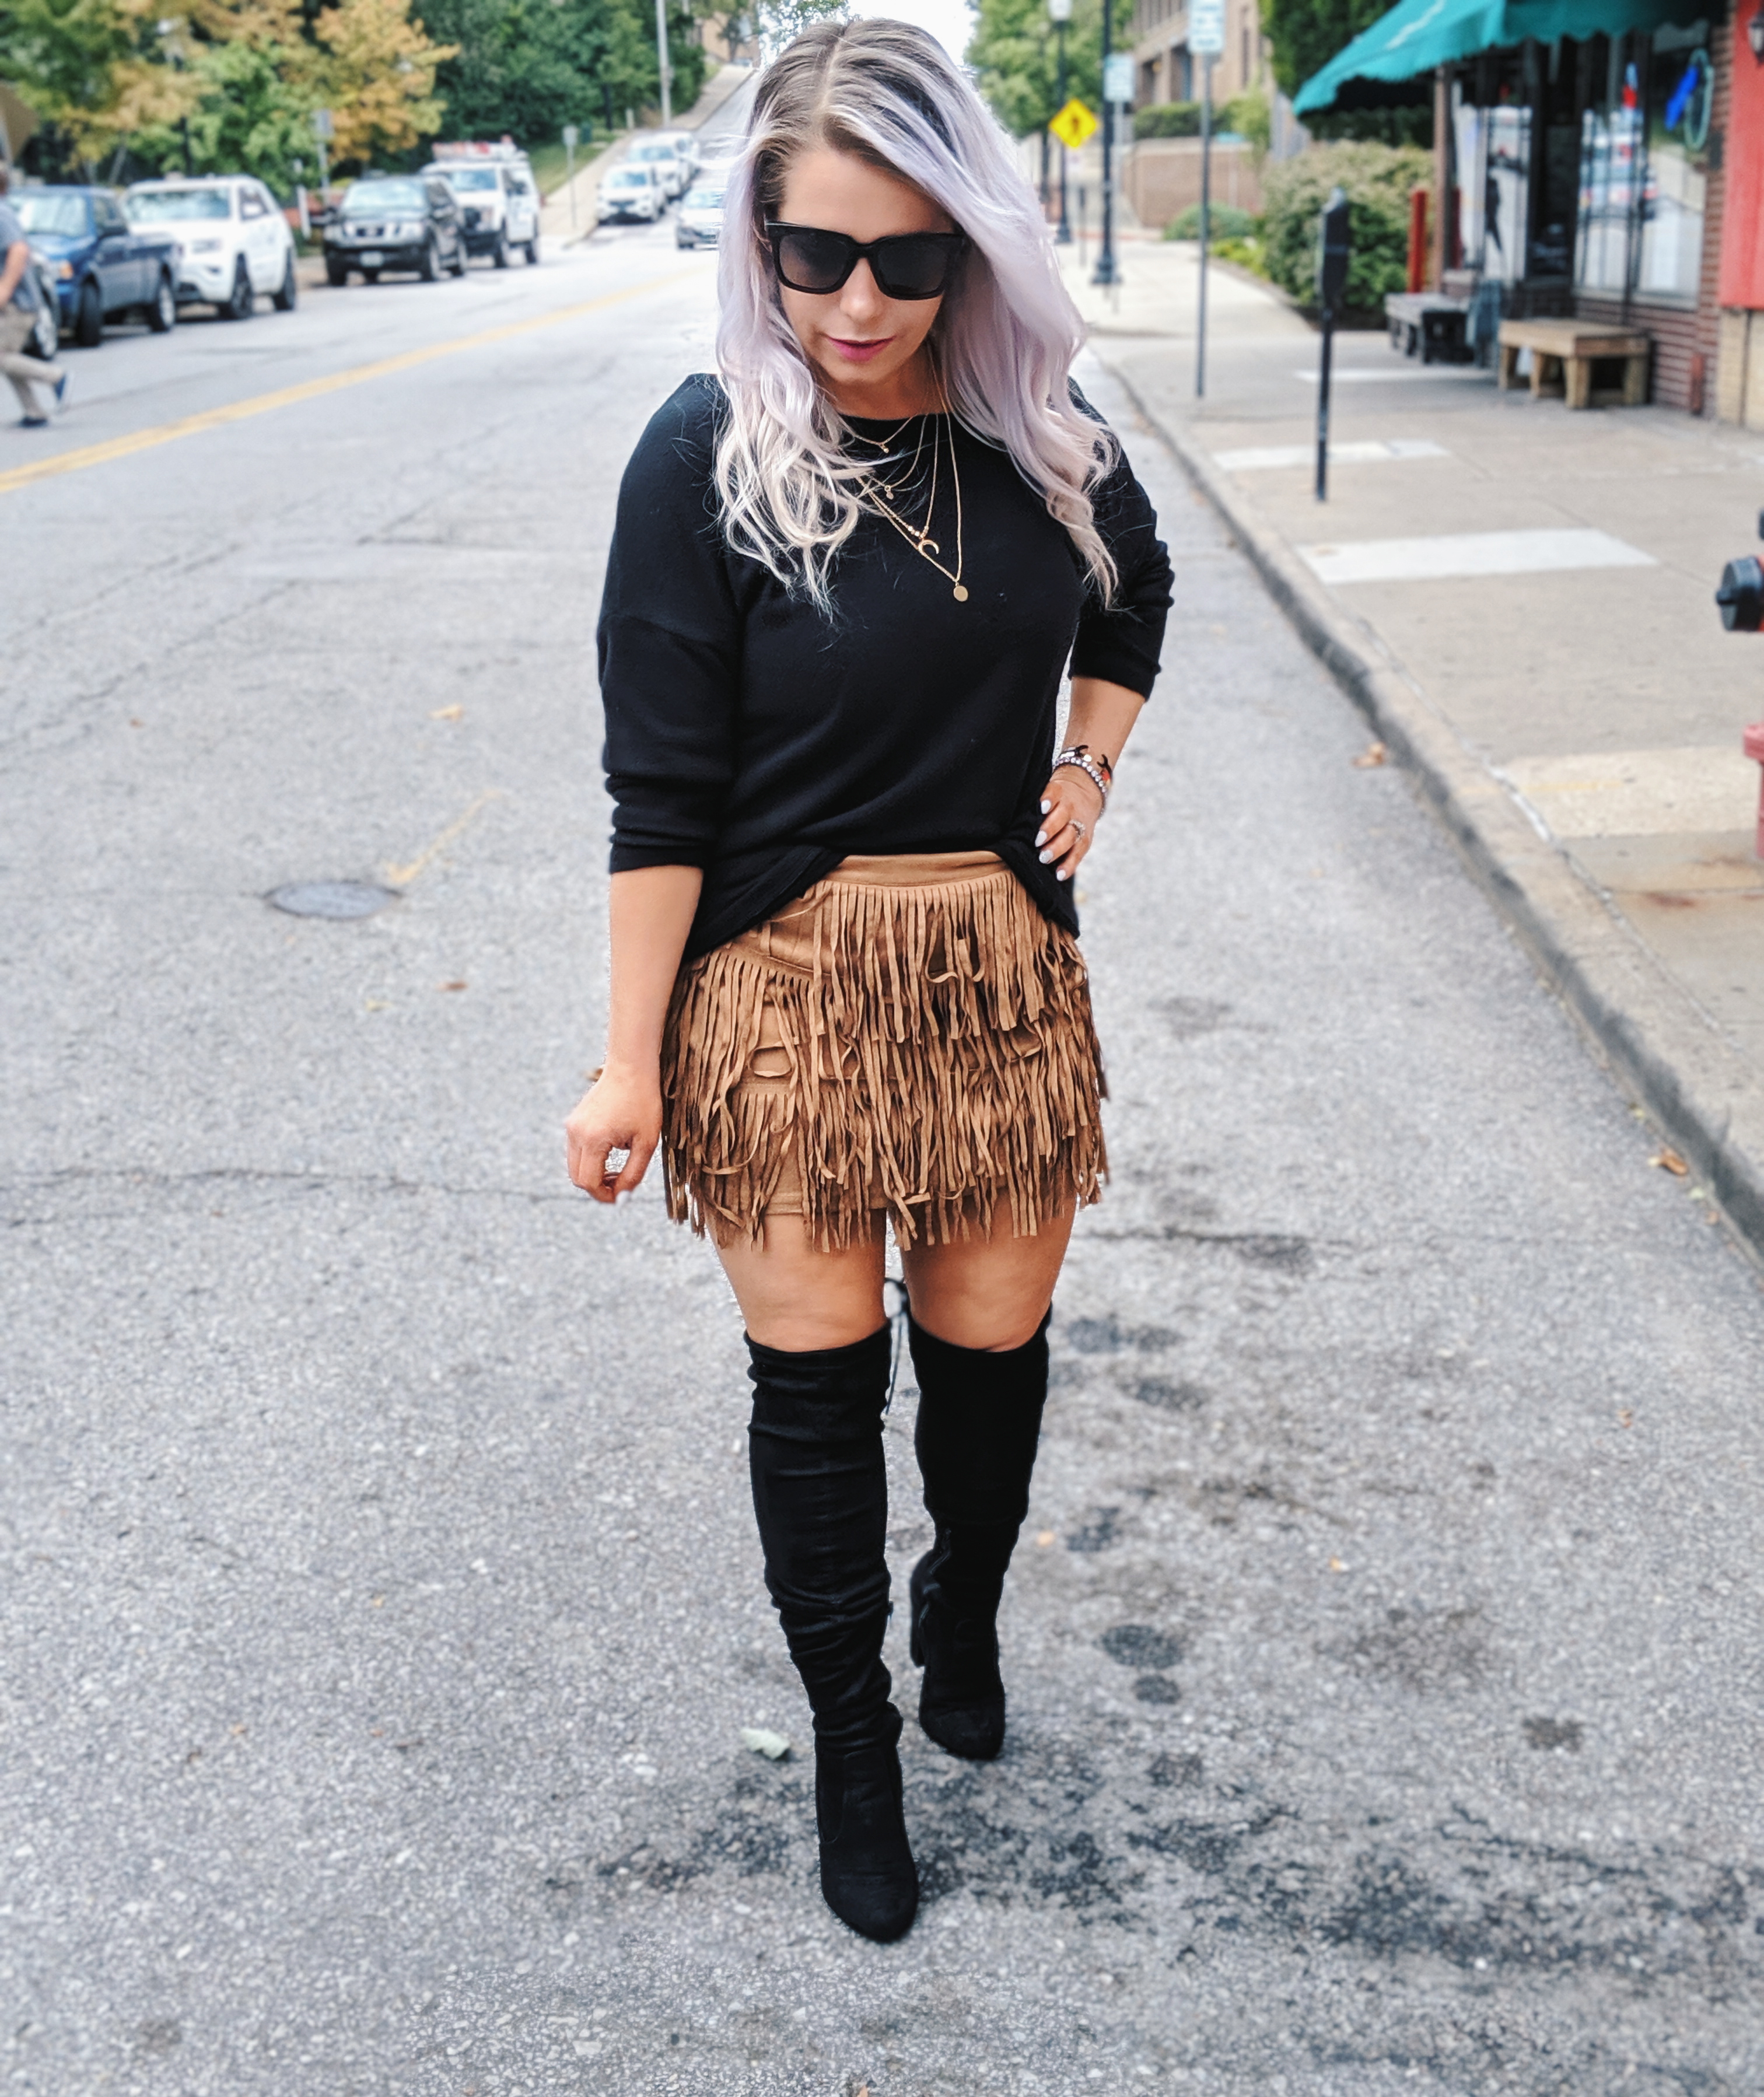 Fringe Skirt Outfit Ideas - Fall Street Style 2019 • COVET by tricia